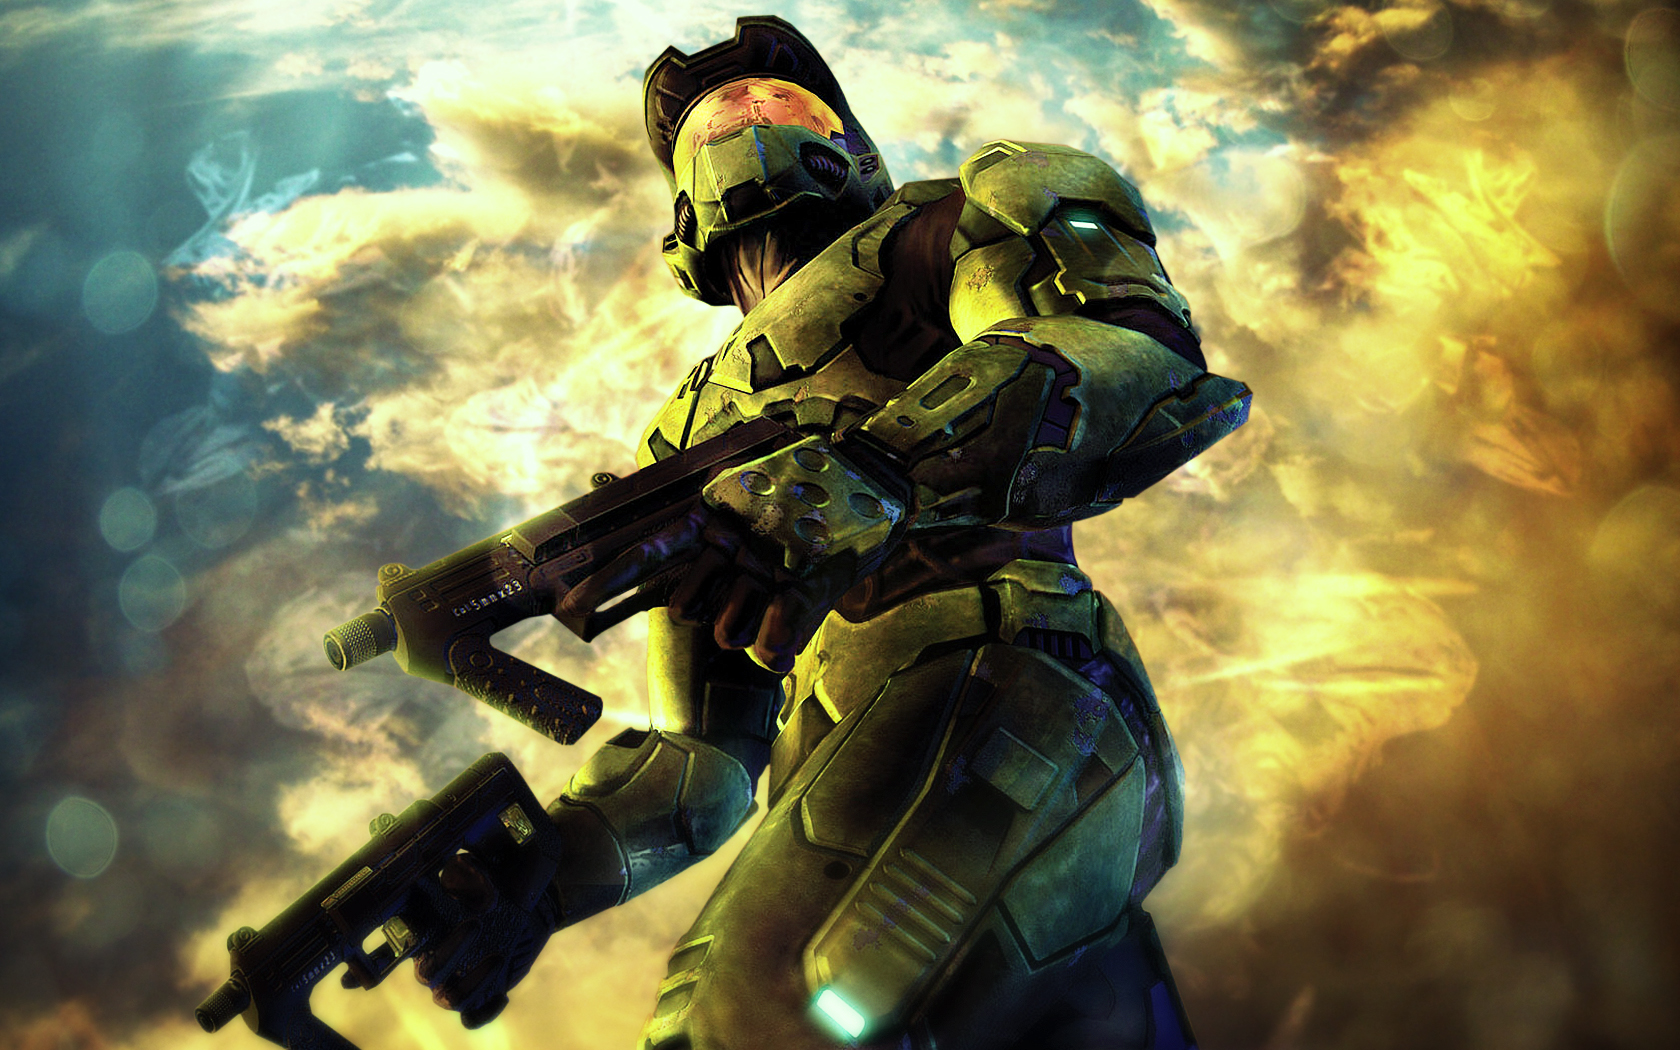 Microsoft Once Lost $500,000 to a Bungie "Behind"